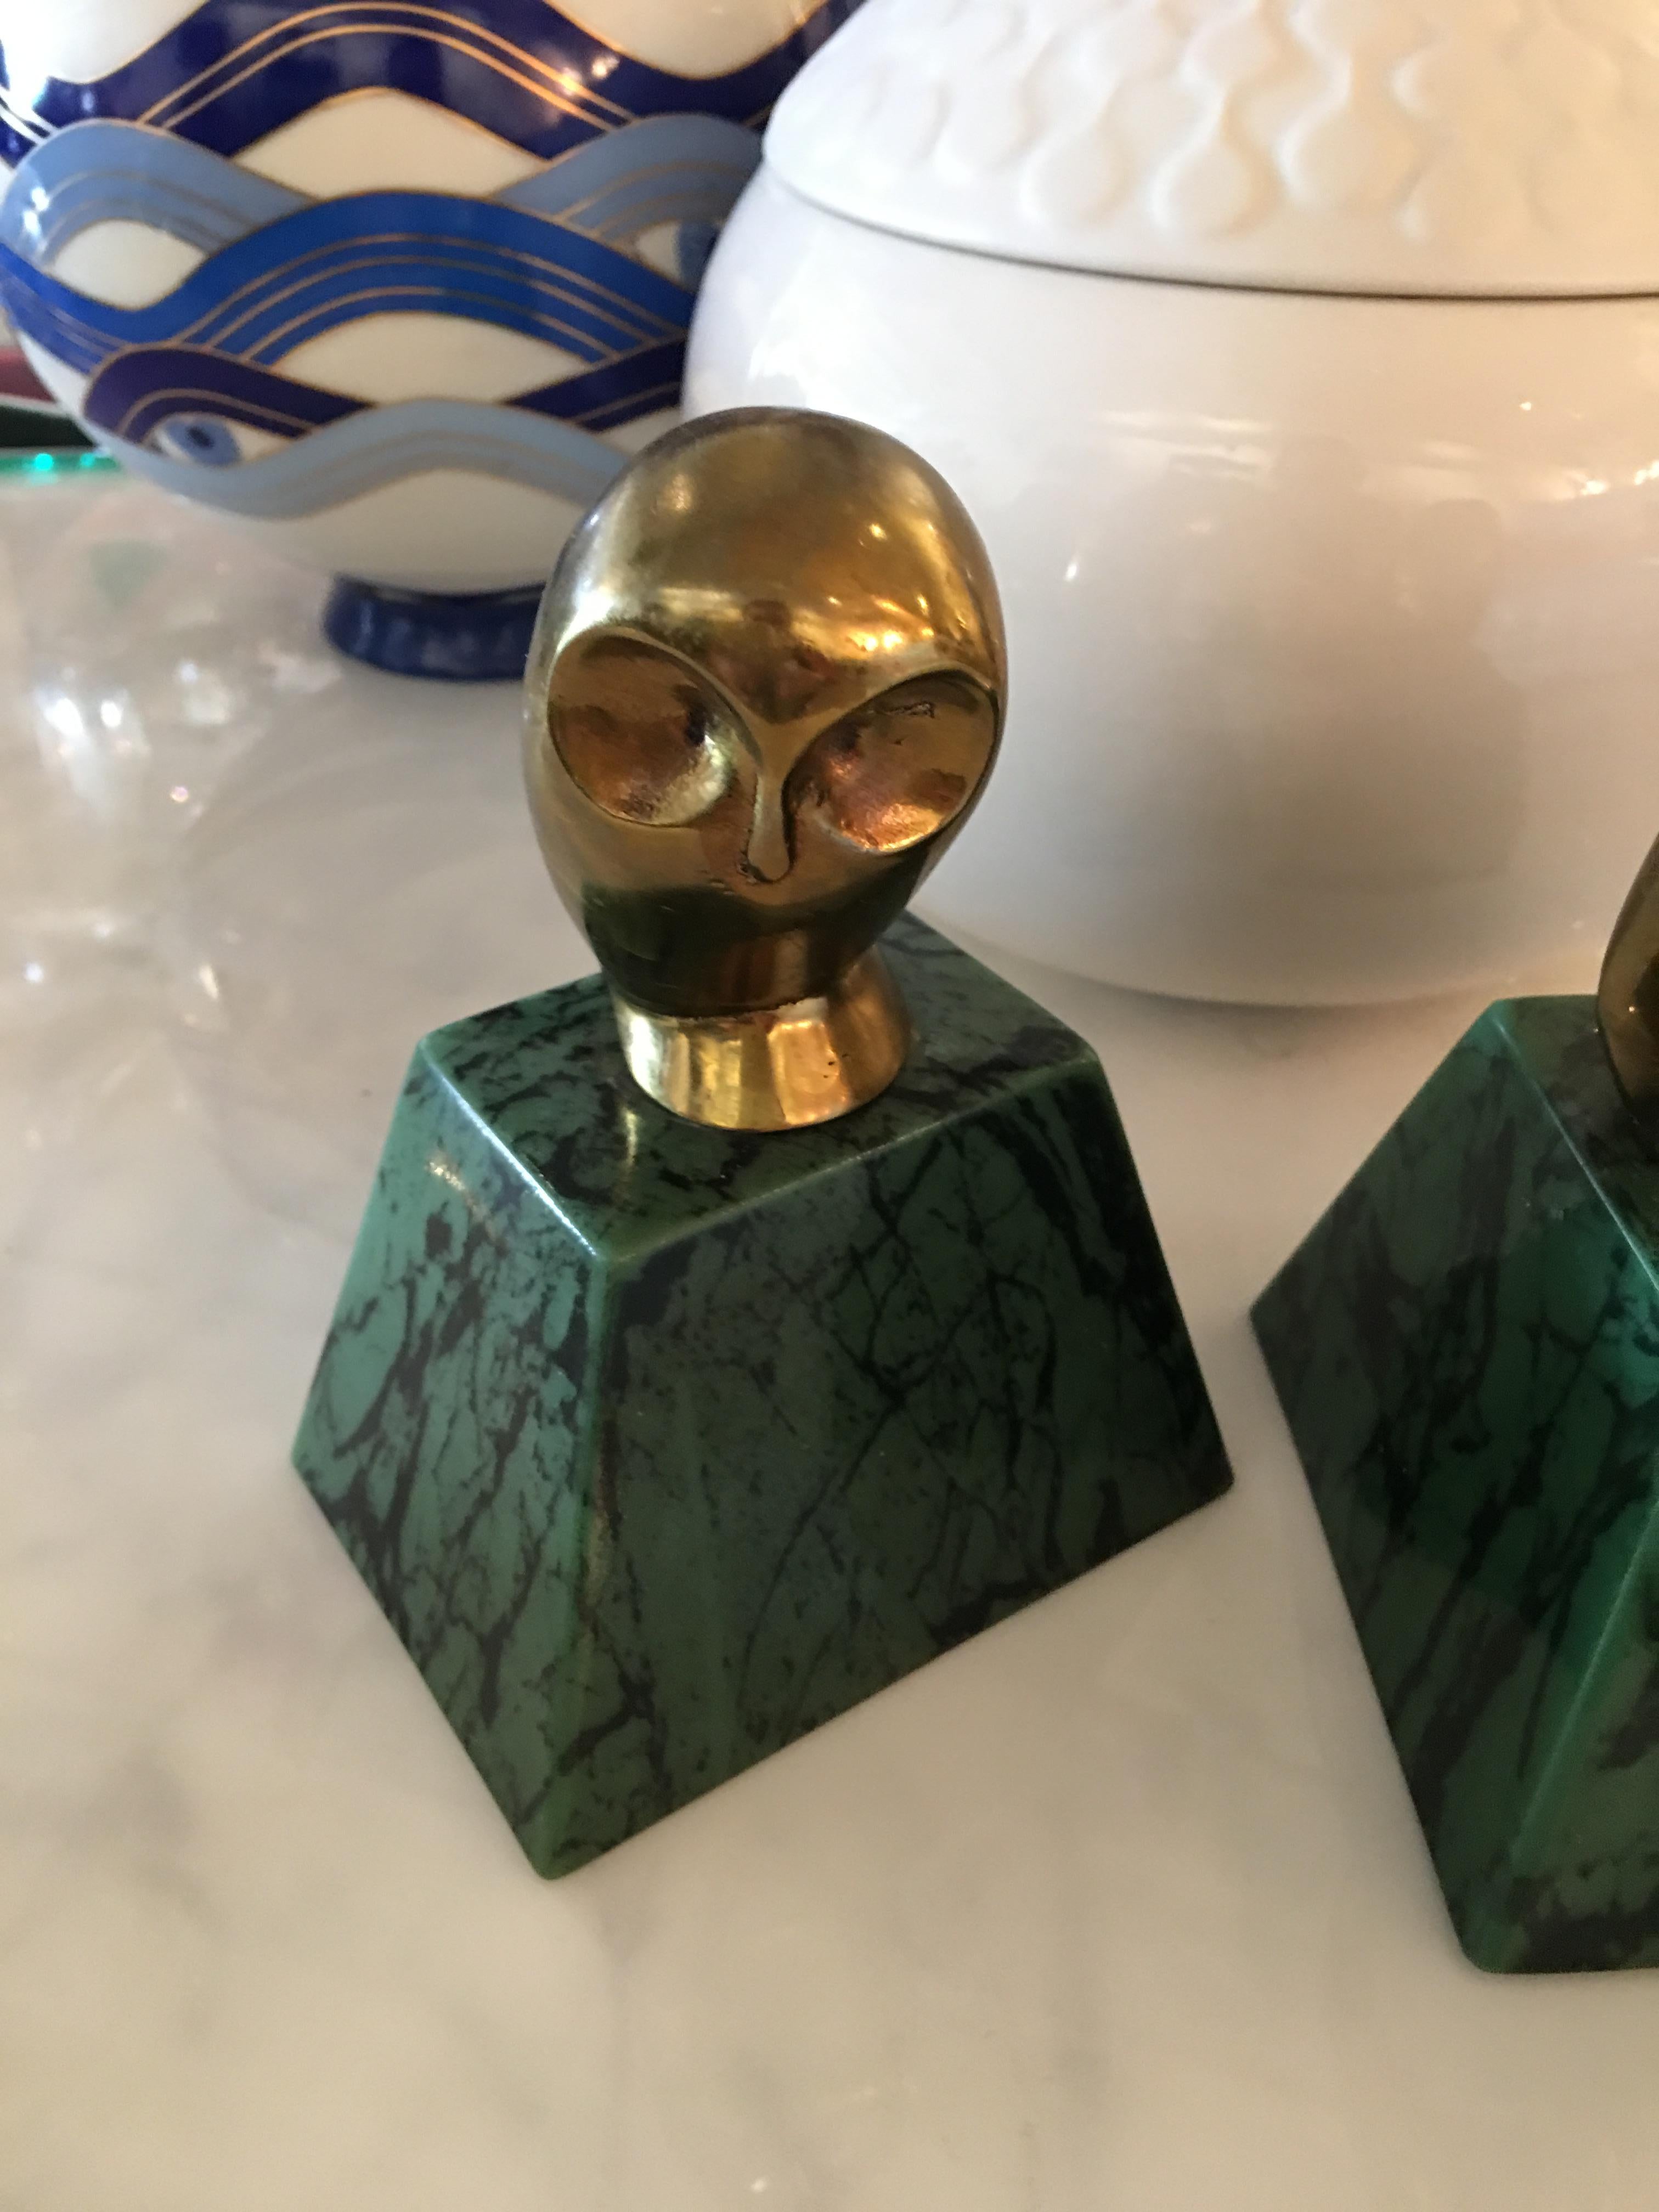 Book ends are cast in brass and sit atop green marble. Quite charming and lively!